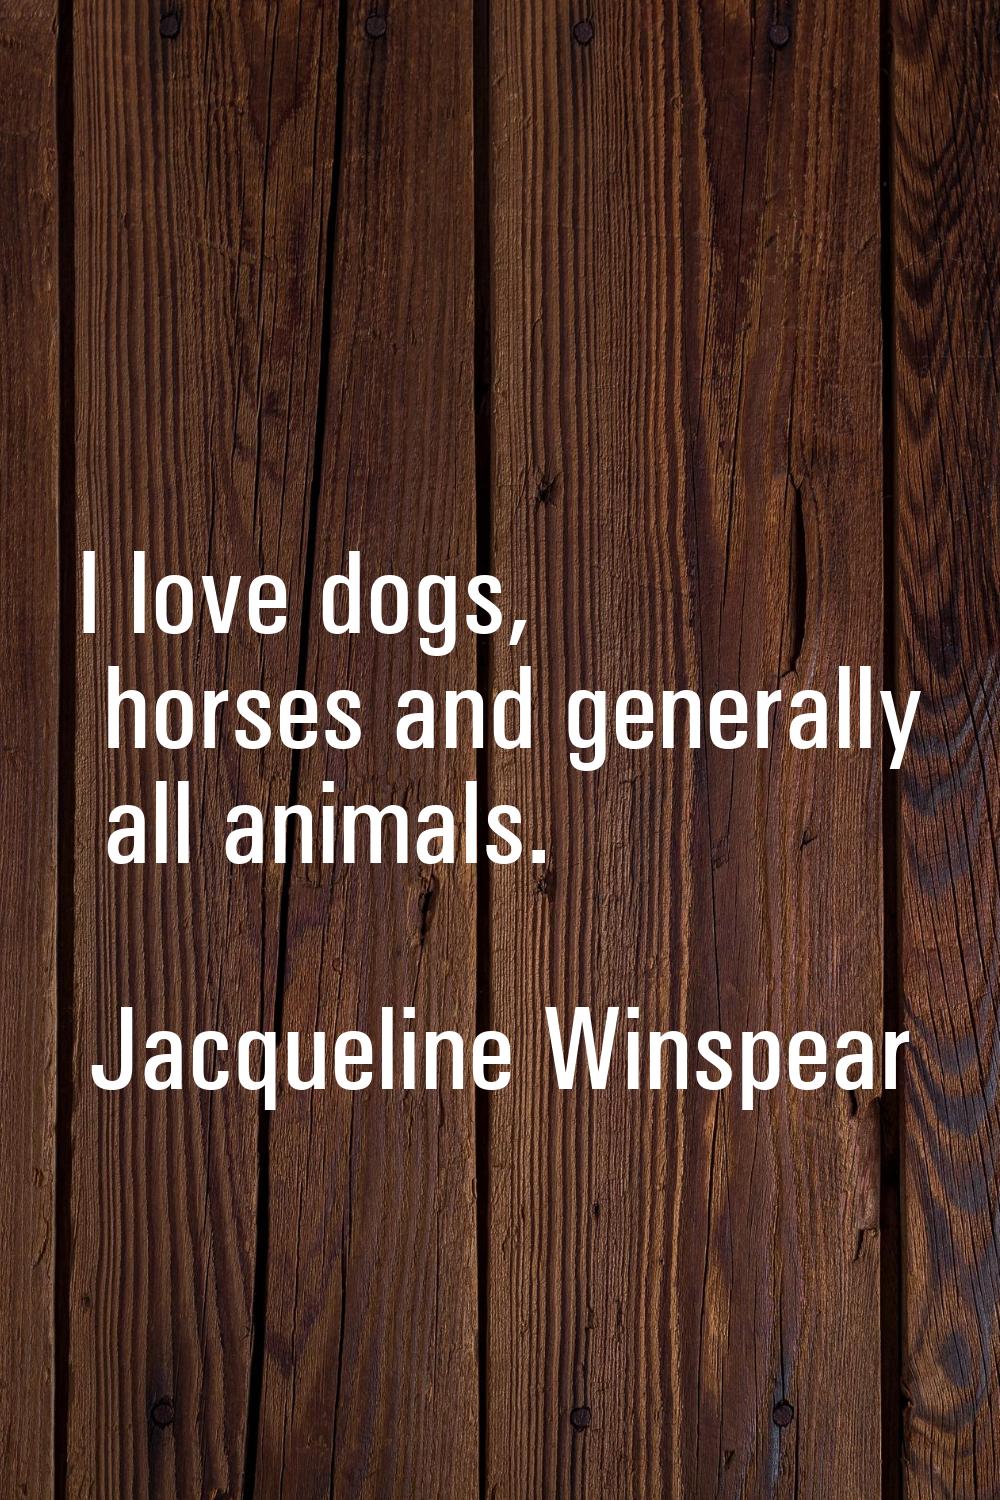 I love dogs, horses and generally all animals.